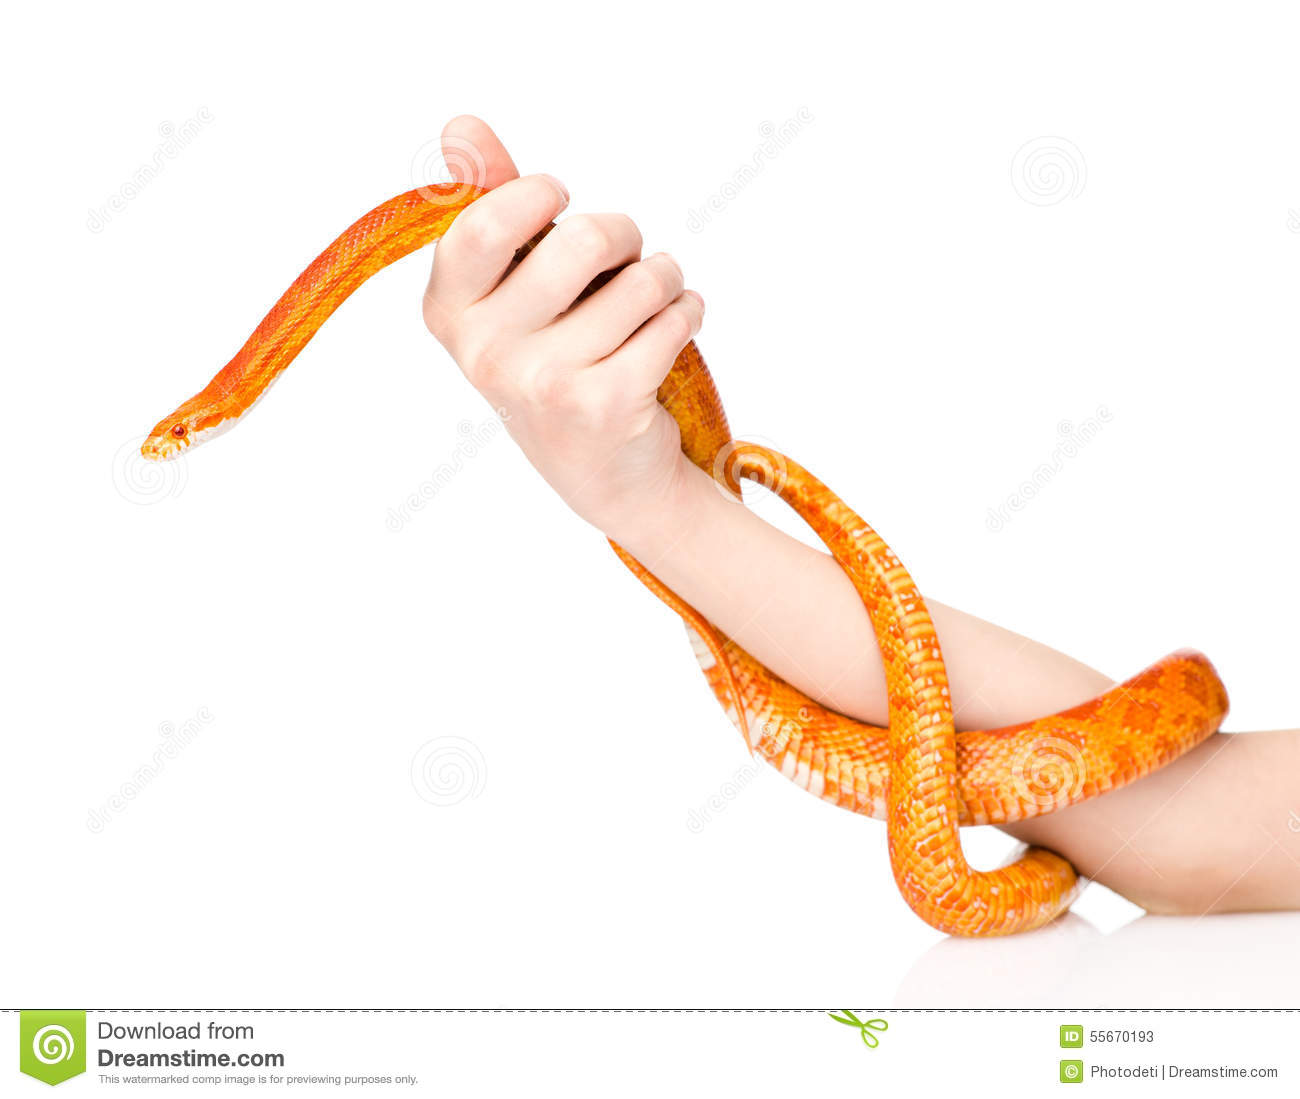 Corn Snake clipart #6, Download drawings